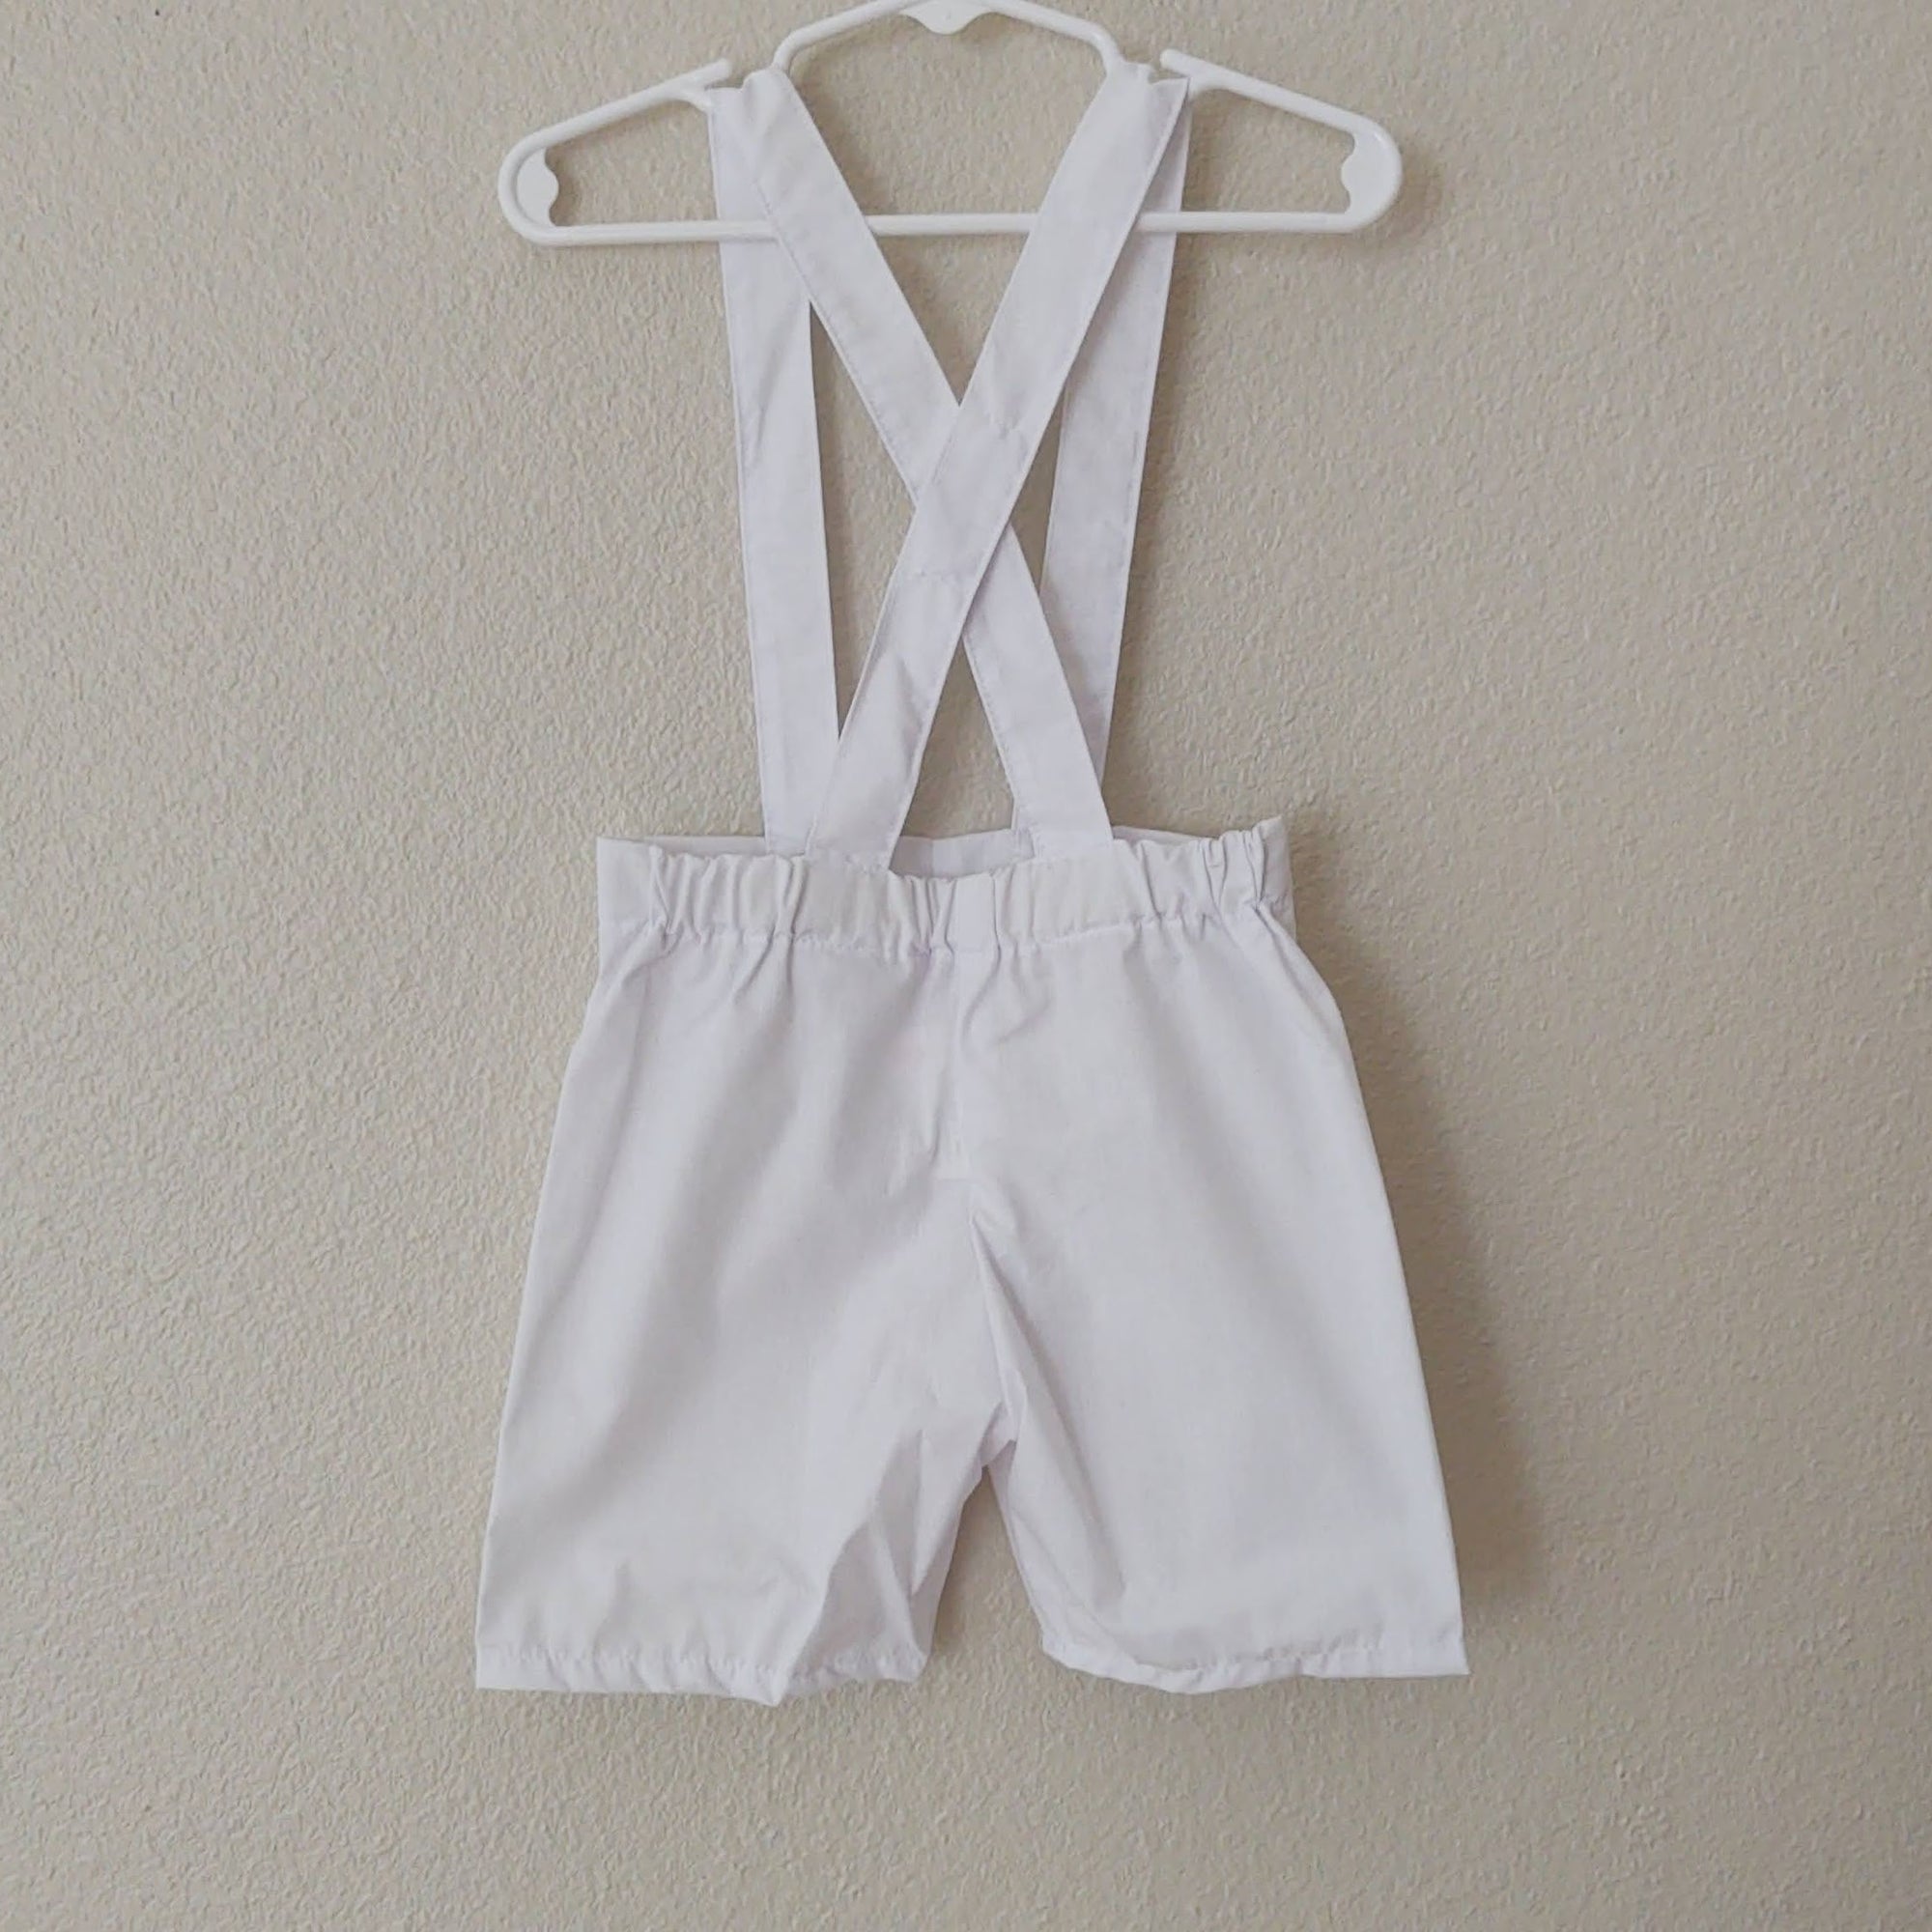 Caught You Lookin Suspender Shorts - 2T